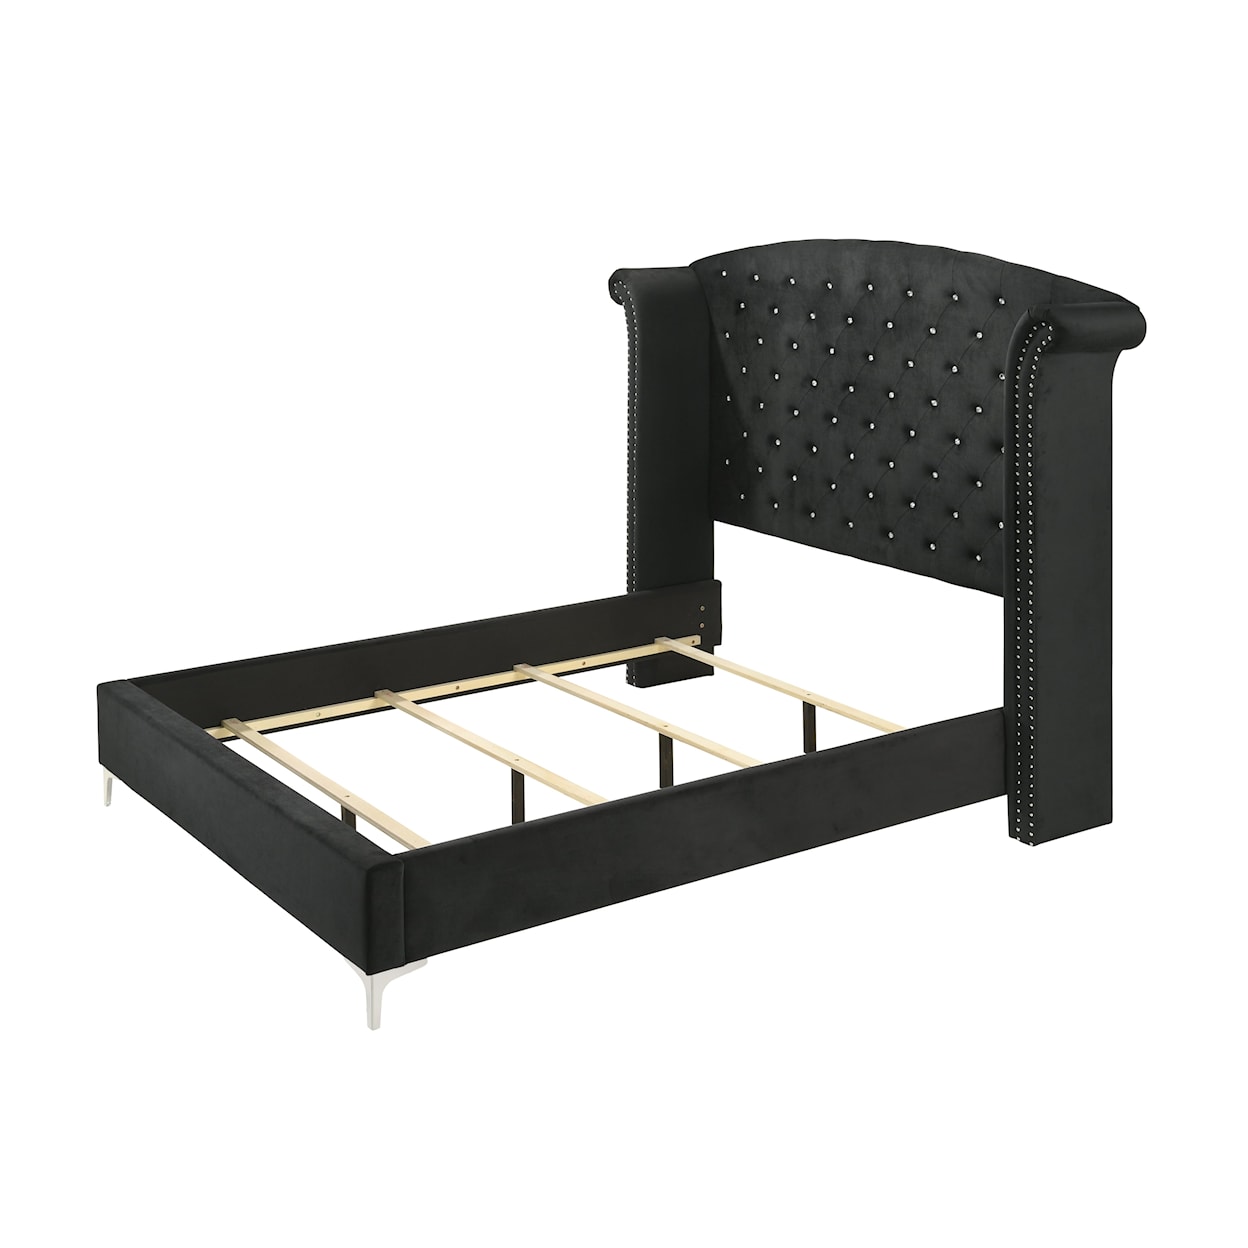 Crown Mark Lucinda Upholstered King Bed with Button-Tufting